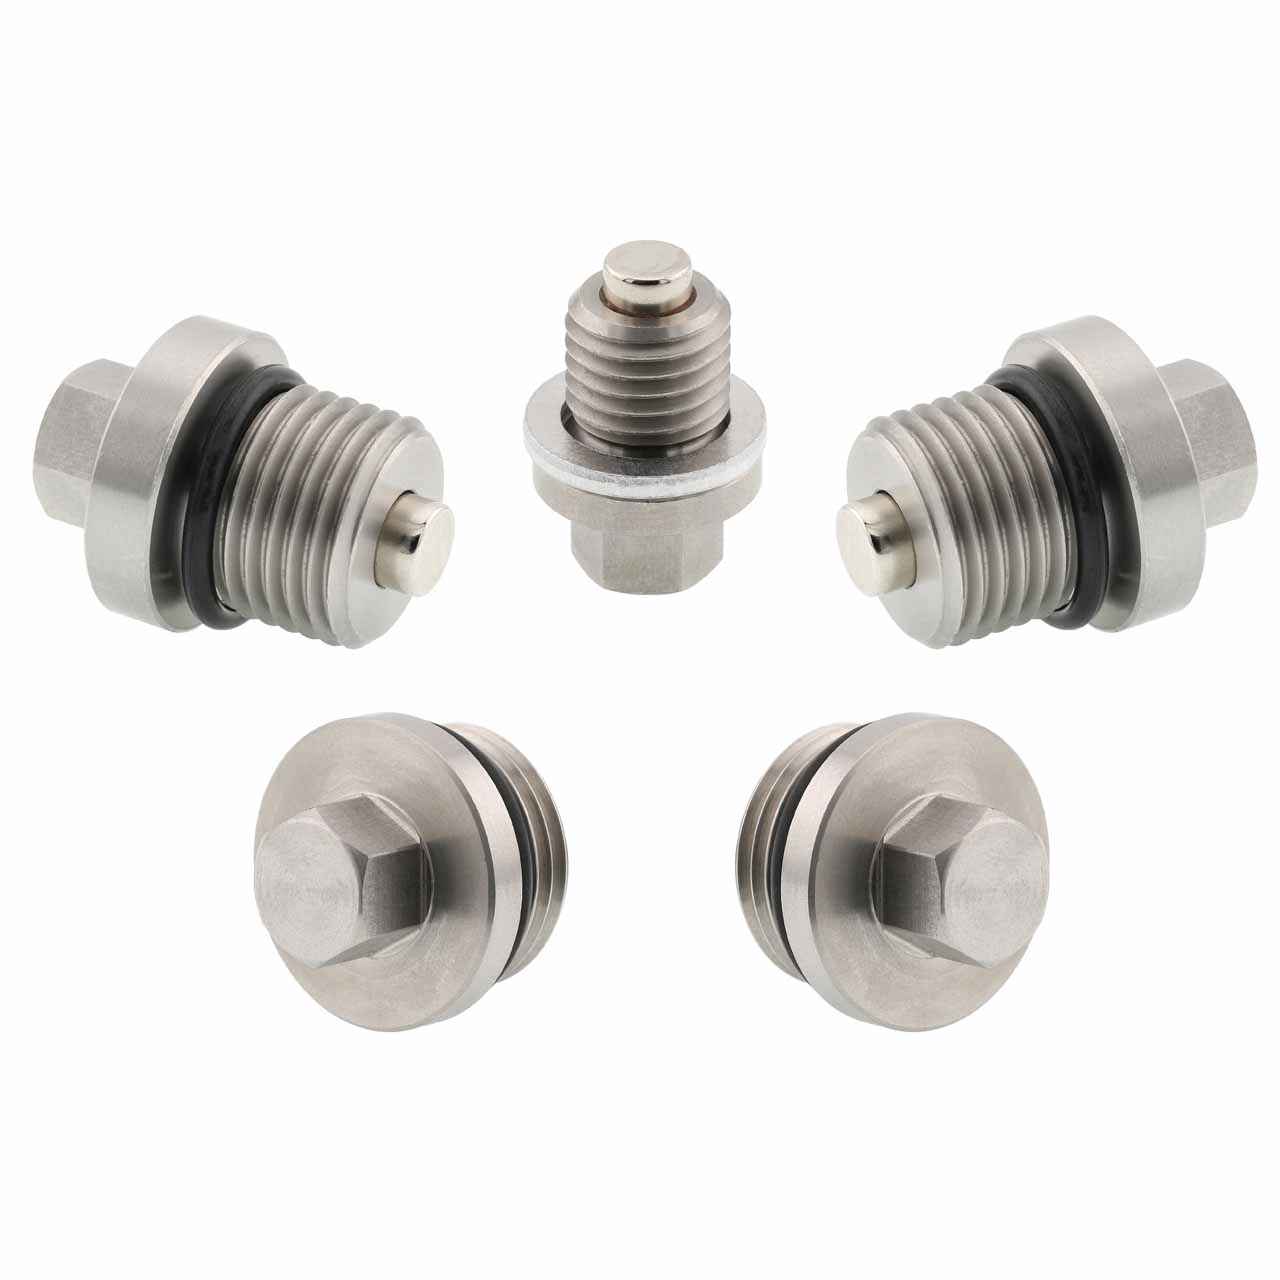 Polaris General XP 1000 Ultimate Magnetic Oil Drain Plug Kit - 2023 - Engine, Transmission, Differential - Made In USA